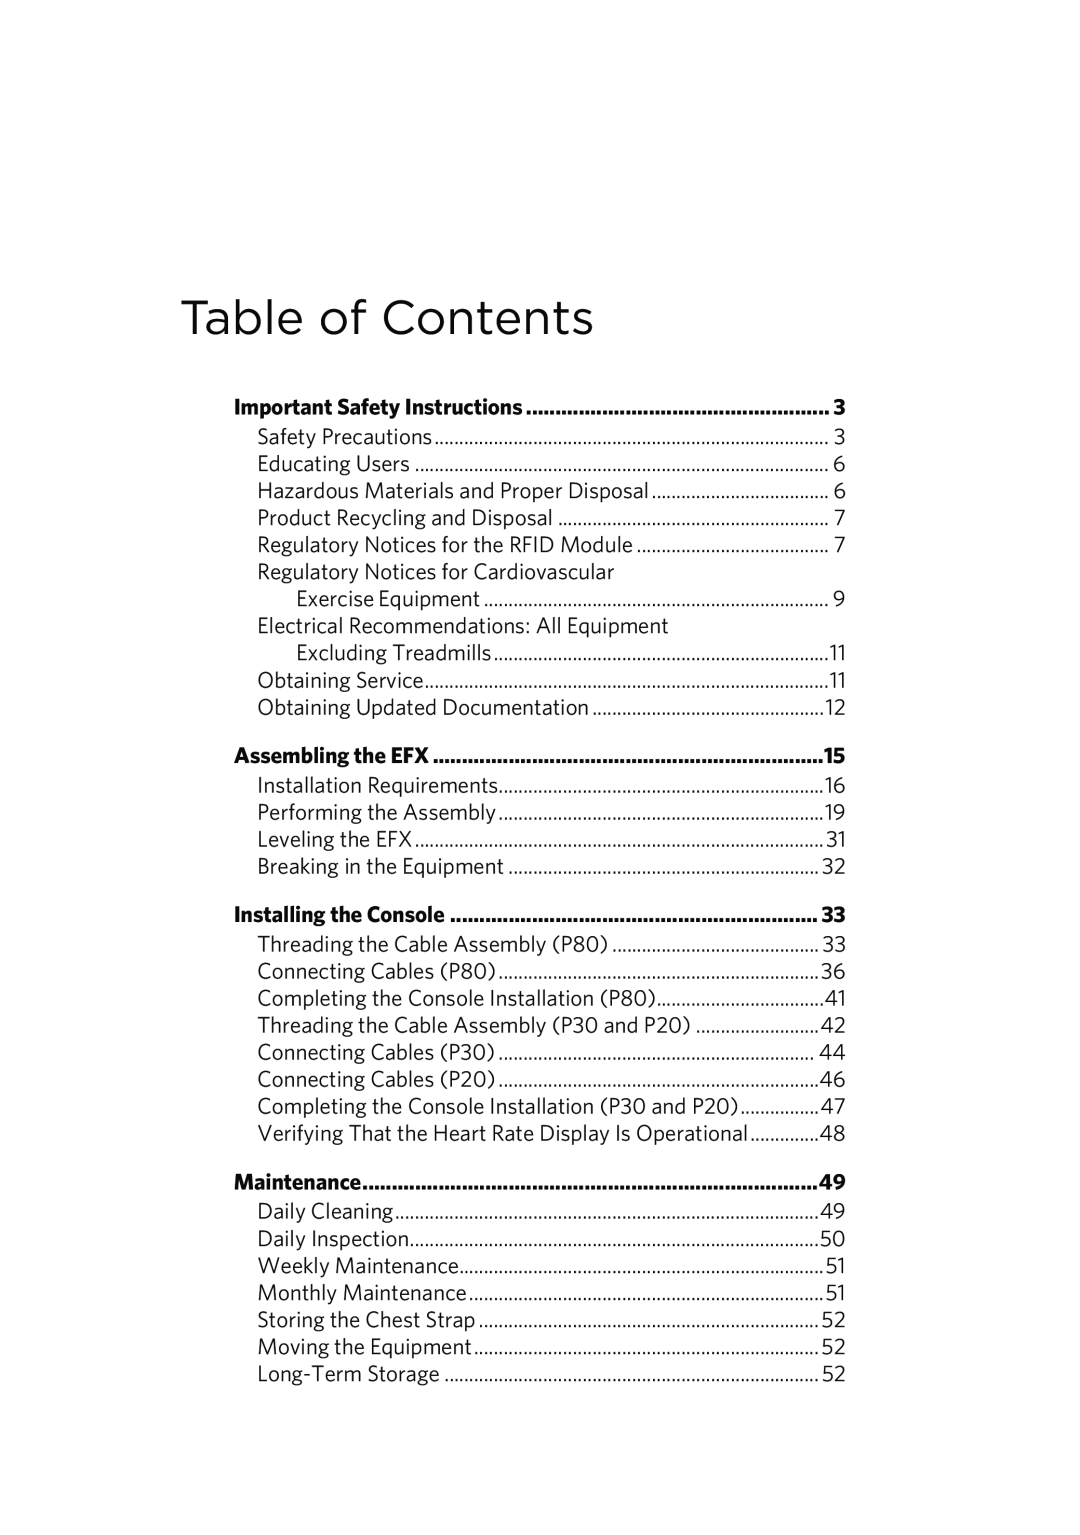 Precor P80 manual Table of Contents, Regulatory Notices for Cardiovascular 